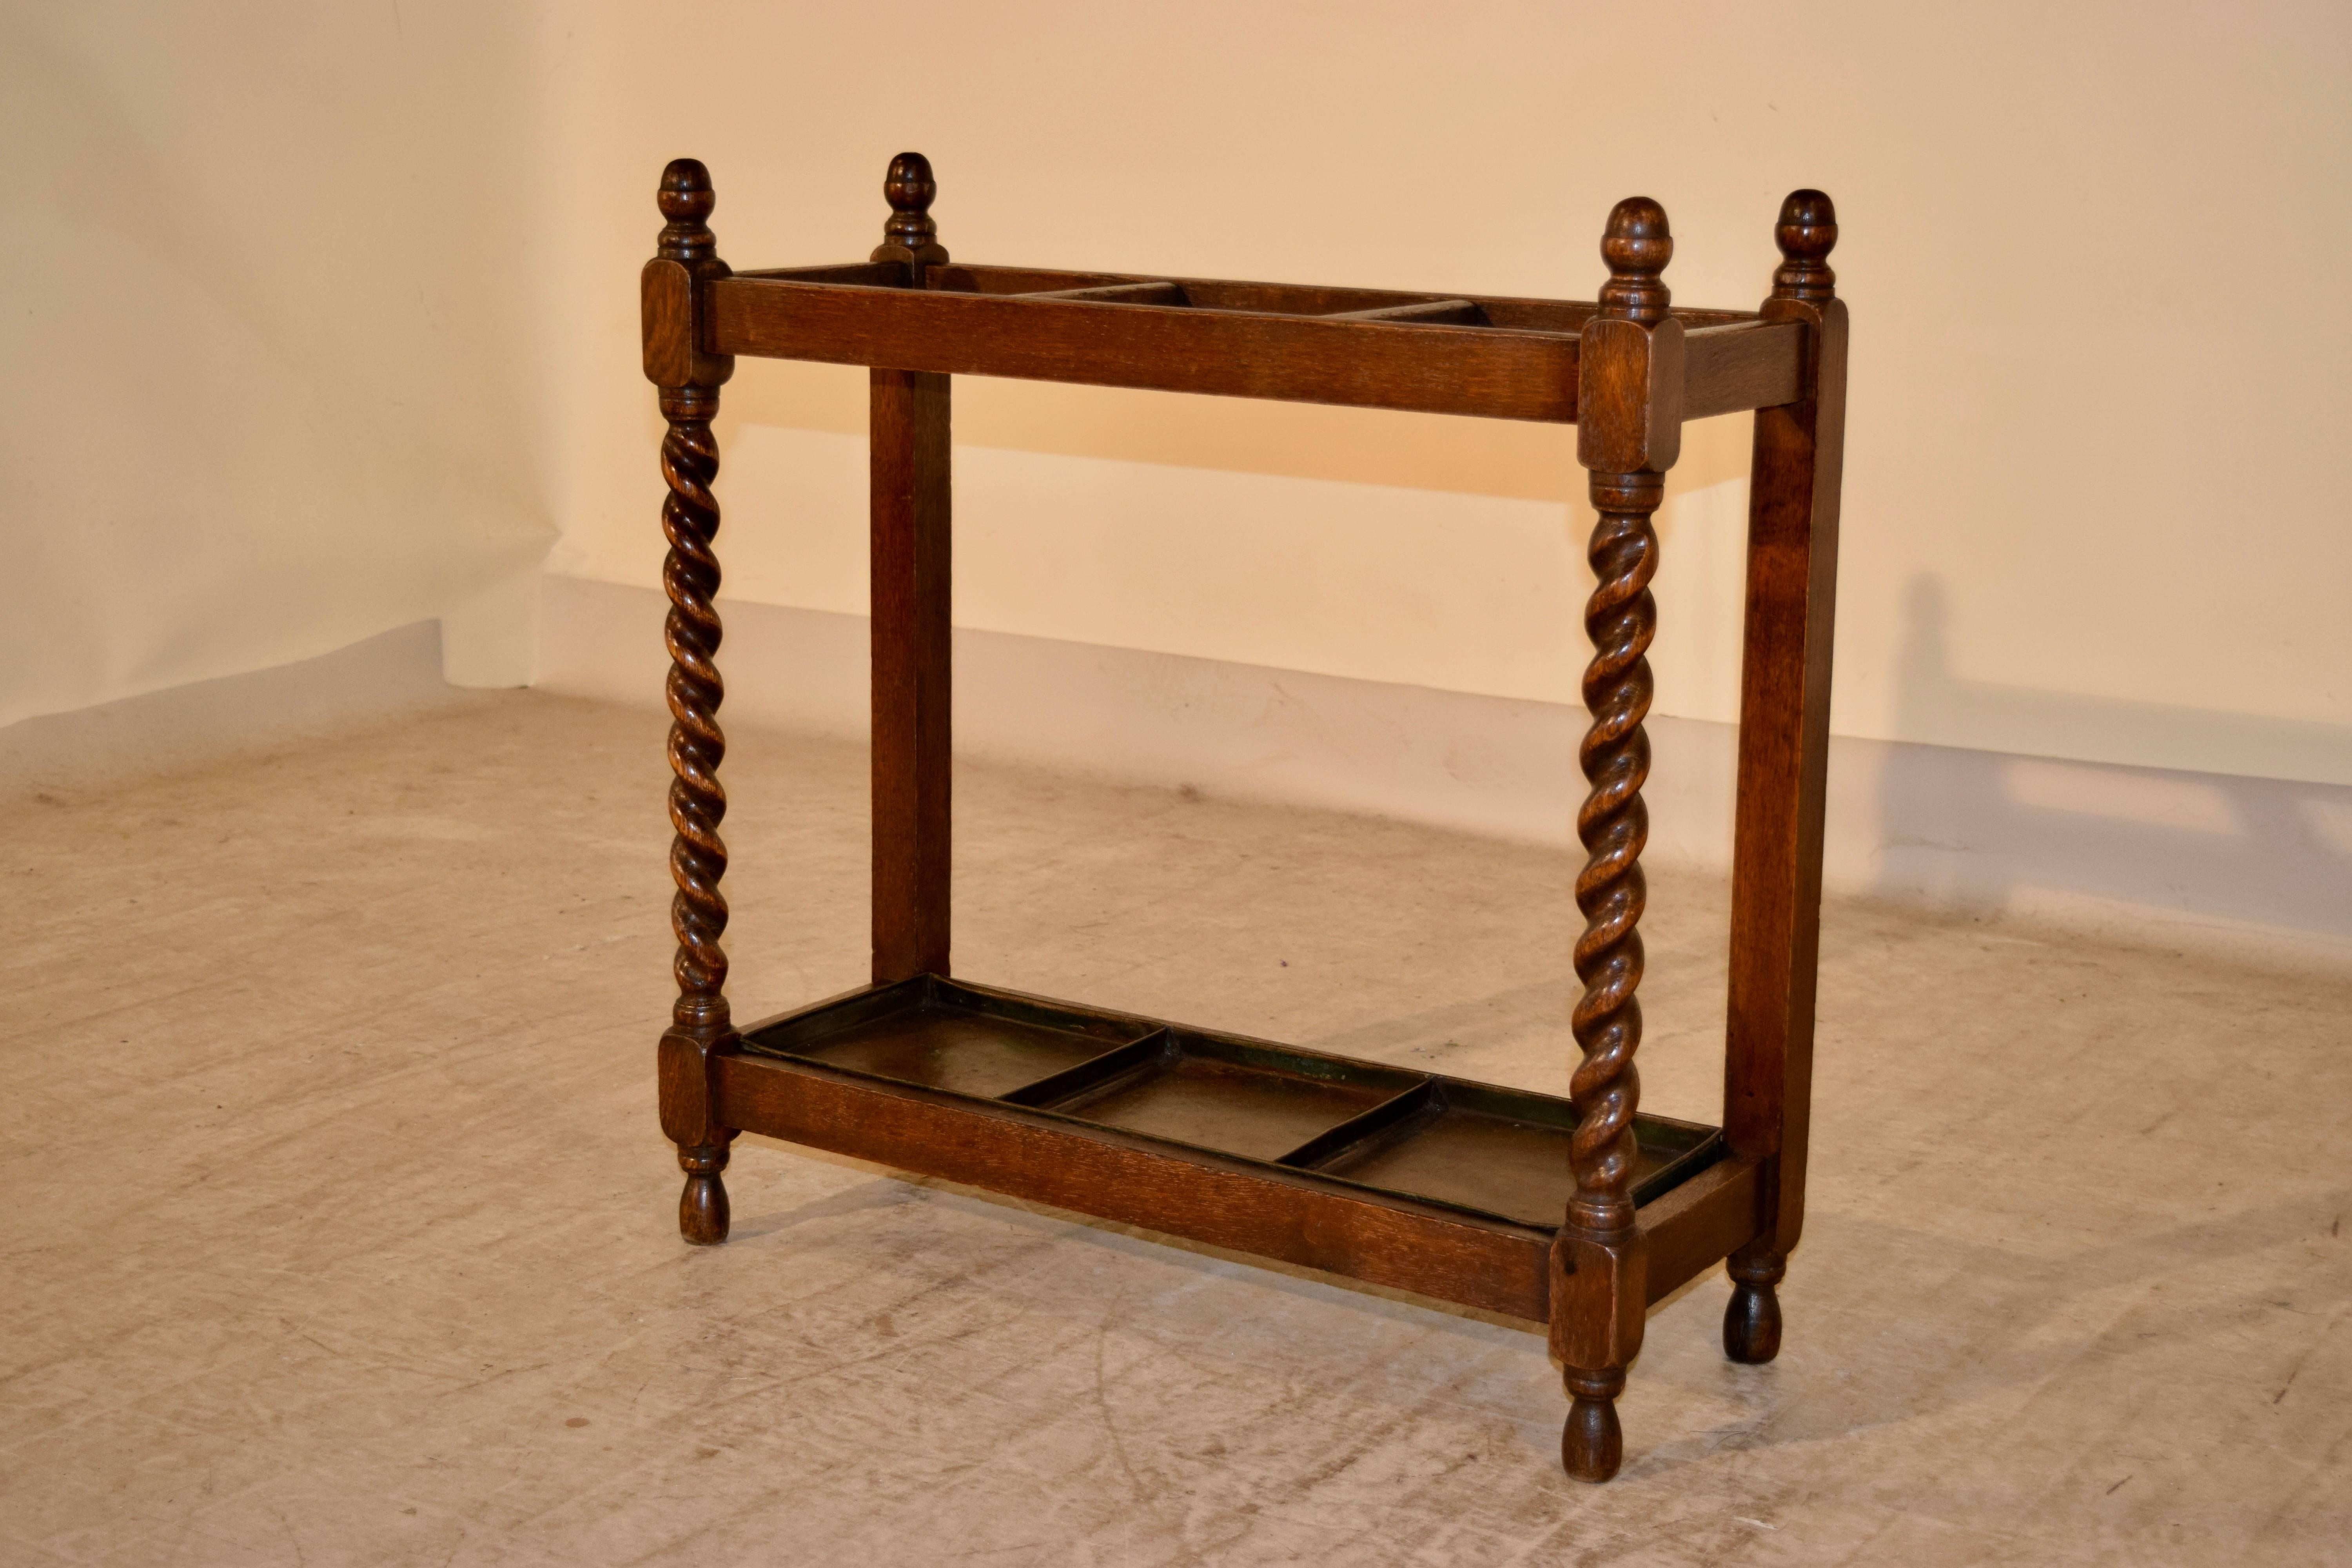 Late 19th century English oak umbrella stand with finials on the top, following down to hand-turned barley twist legs in the front and simple legs in the back for easy placement against a wall. It retains what appears to be the original tray and is